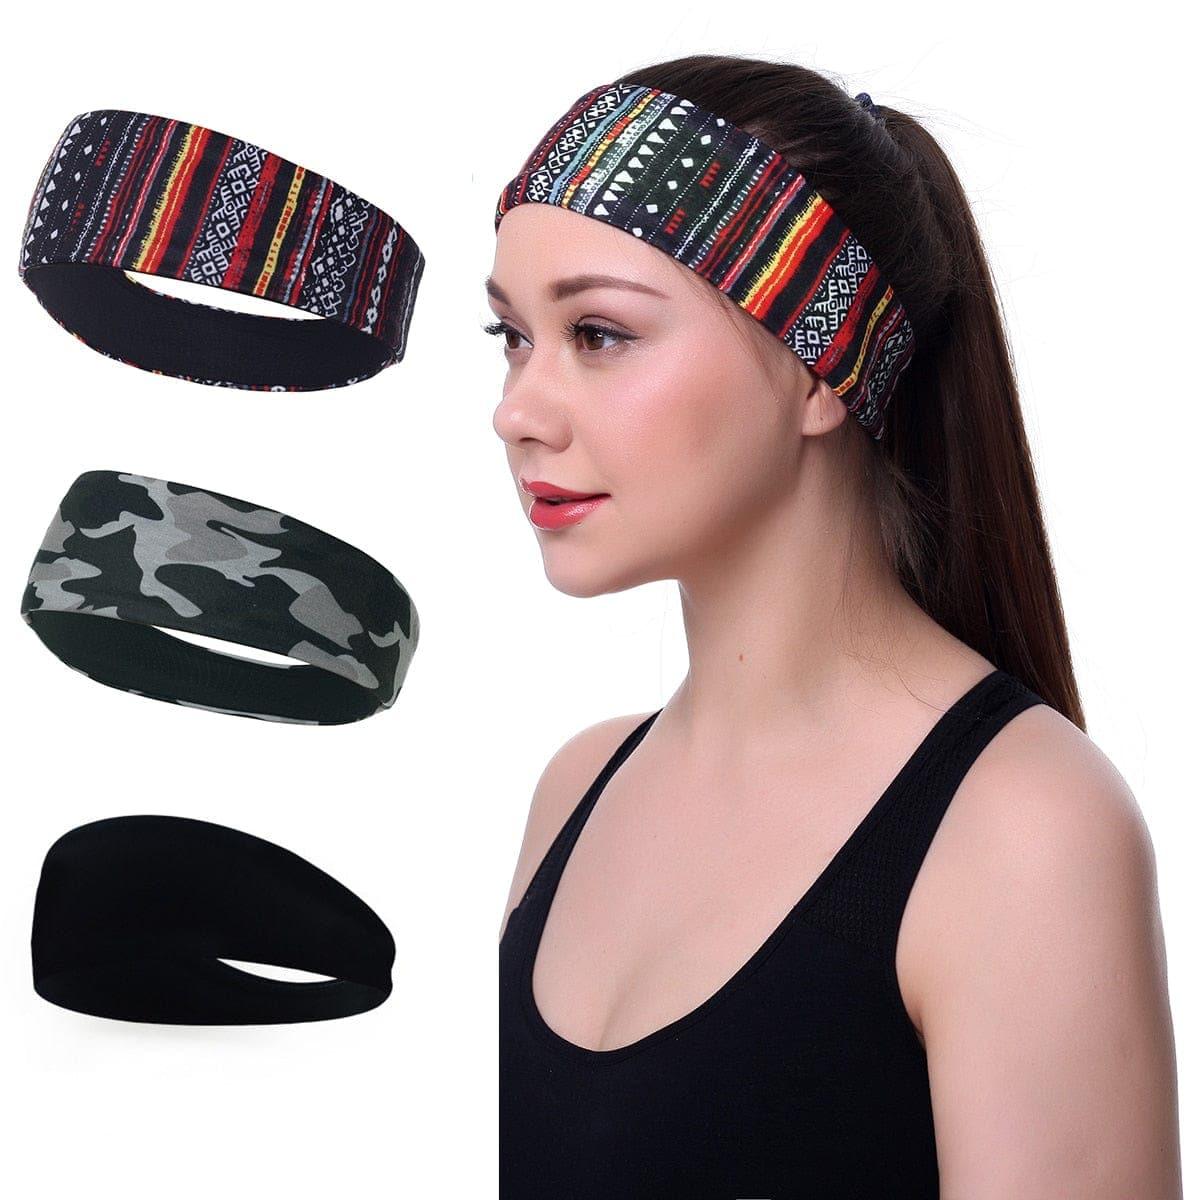 Men sweatband sports Headband Stretch Elastic Women Yoga Running hair band for men Outdoor Sport Headwrap Fitness Sports safety - Ammpoure Wellbeing